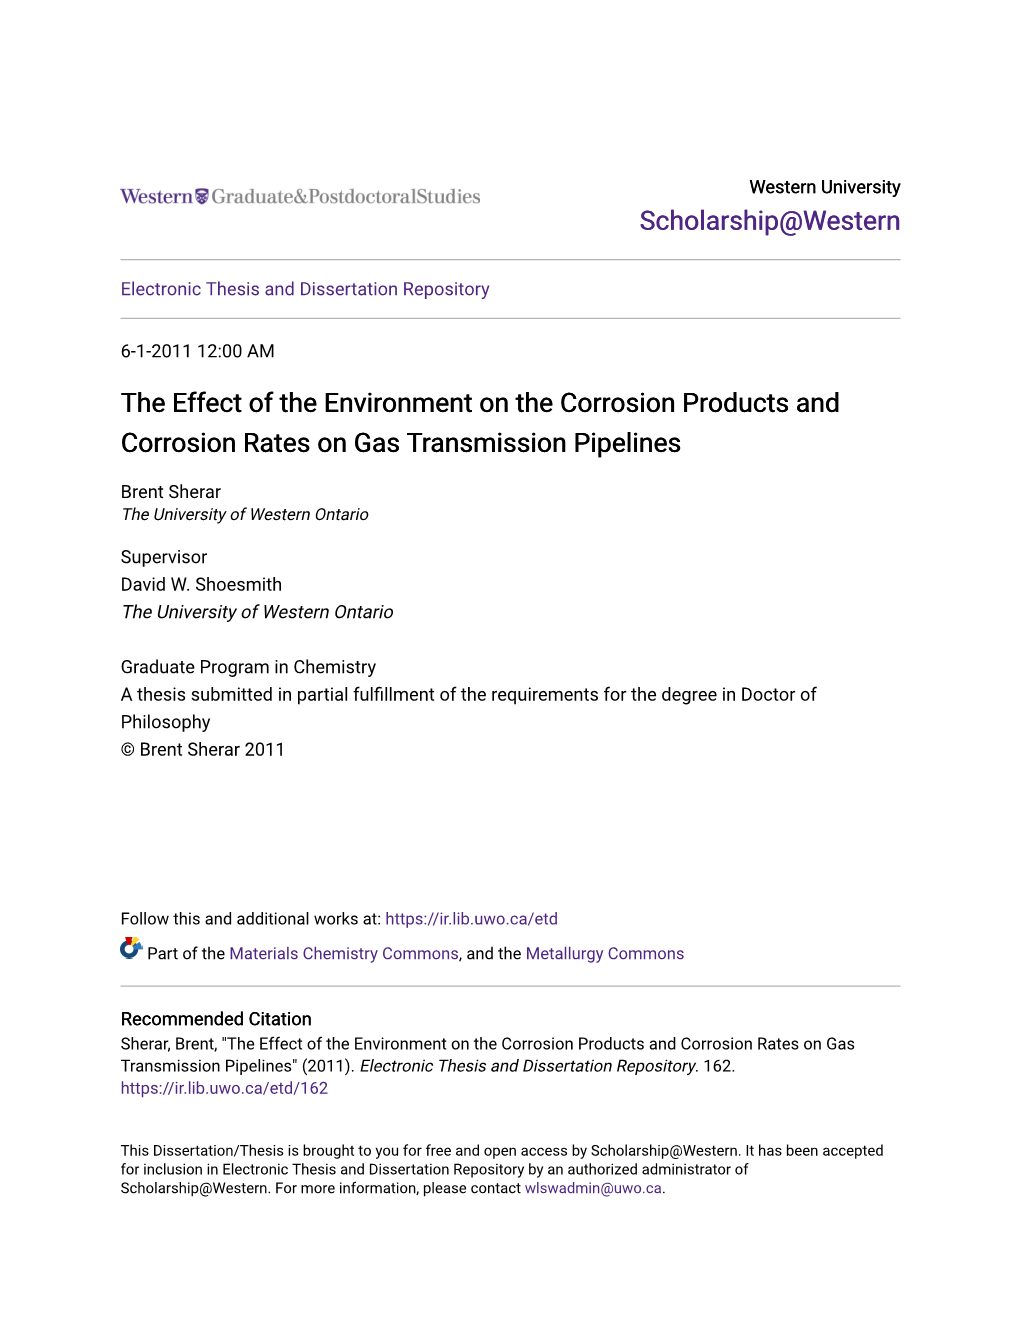 The Effect of the Environment on the Corrosion Products and Corrosion Rates on Gas Transmission Pipelines